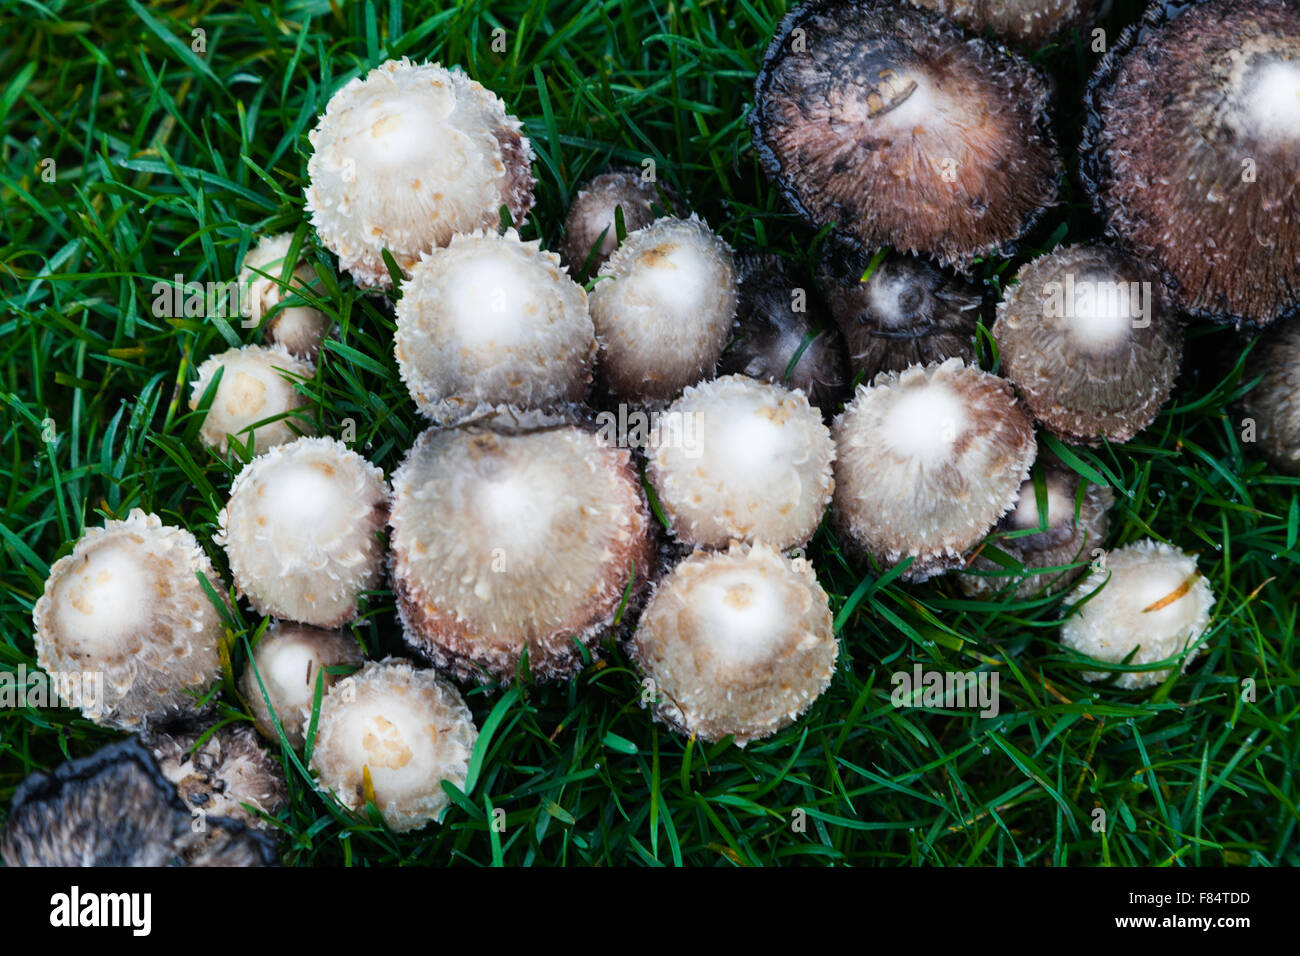 Shaggy Mane mushrooms growing in a landscaped lawn Stock Photo